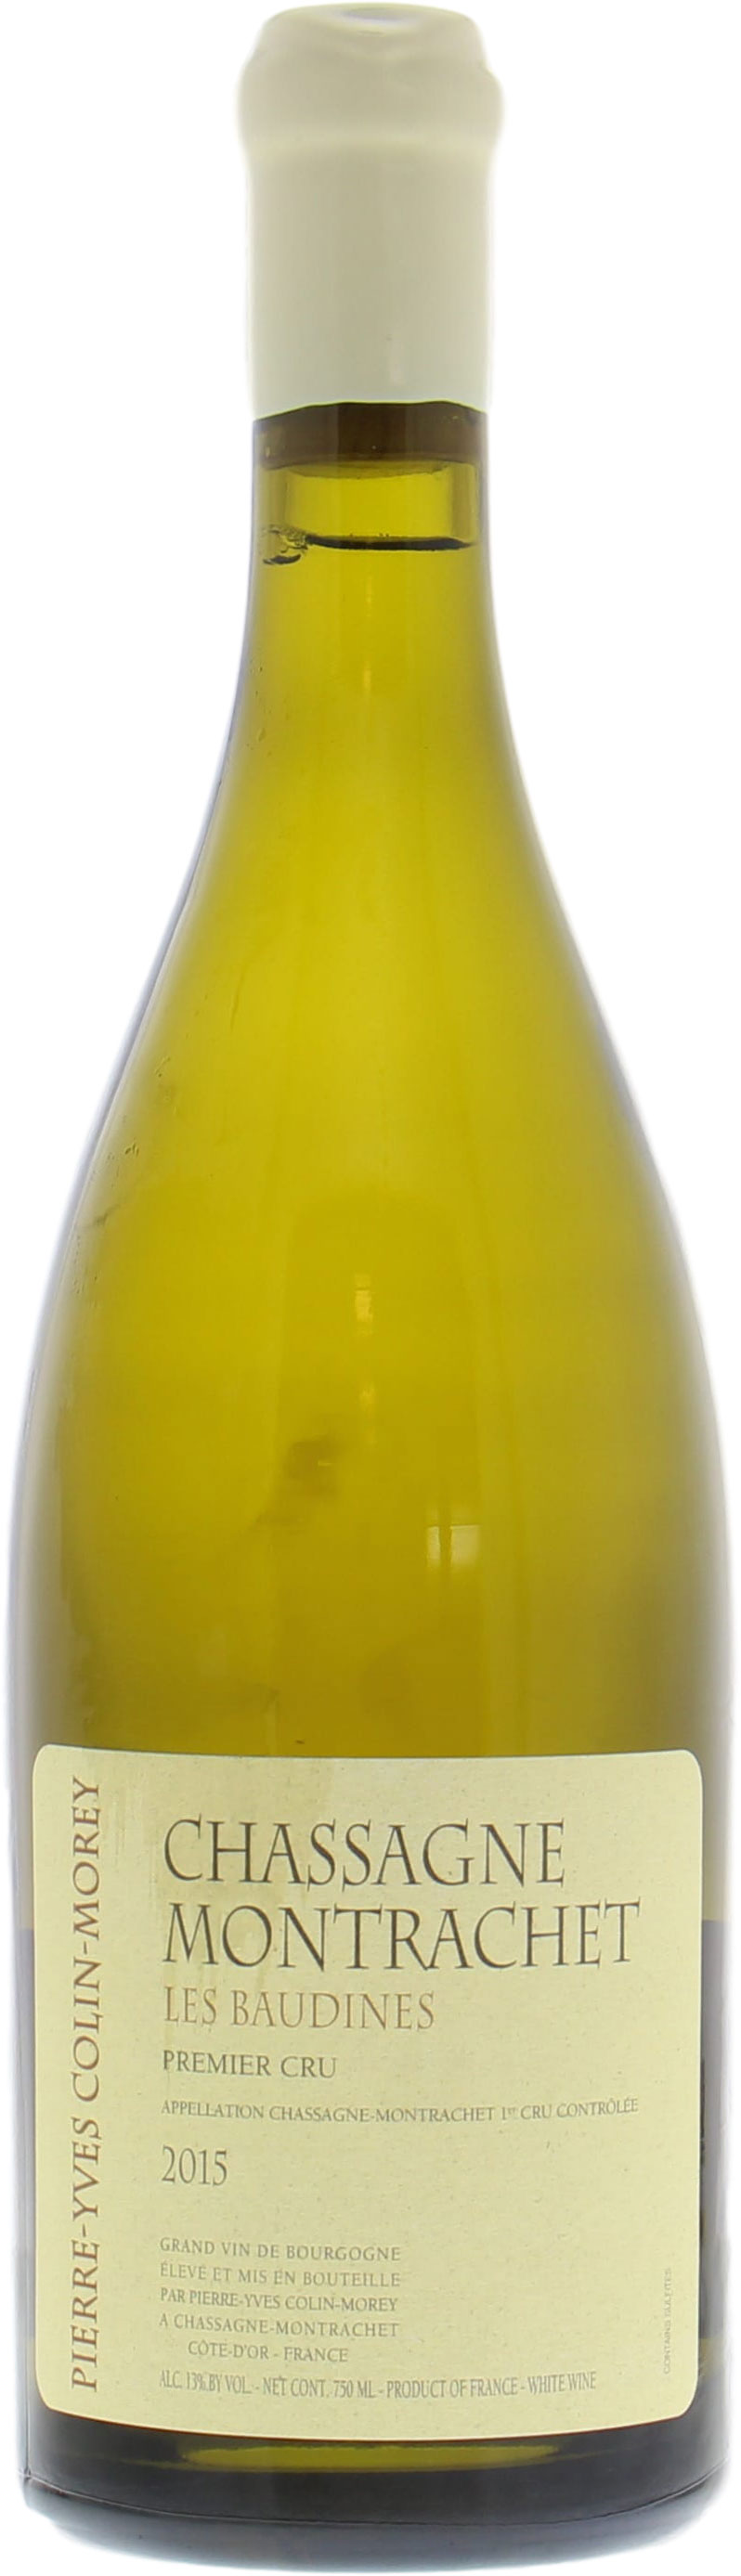 Pierre-Yves Colin-Morey - Chassagne Montrachet Les Baudines 2015 Perfect